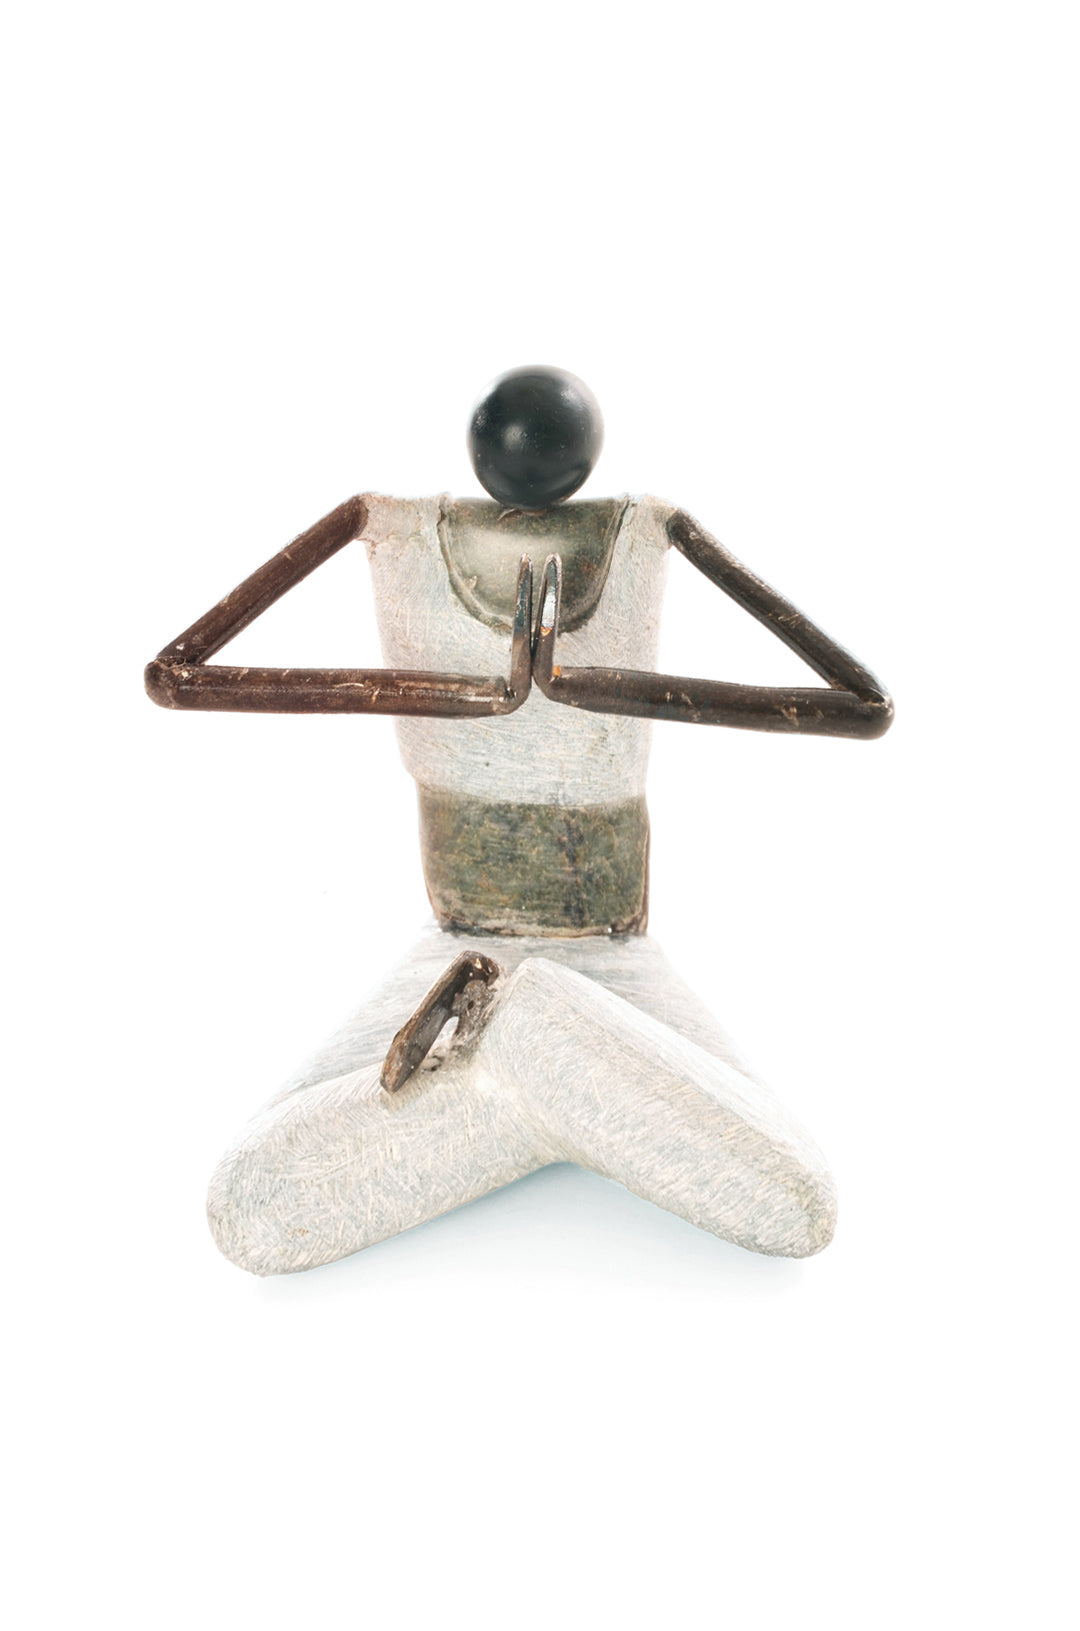 Stone and Metal Yogi Sculpture with Peaceful Hands